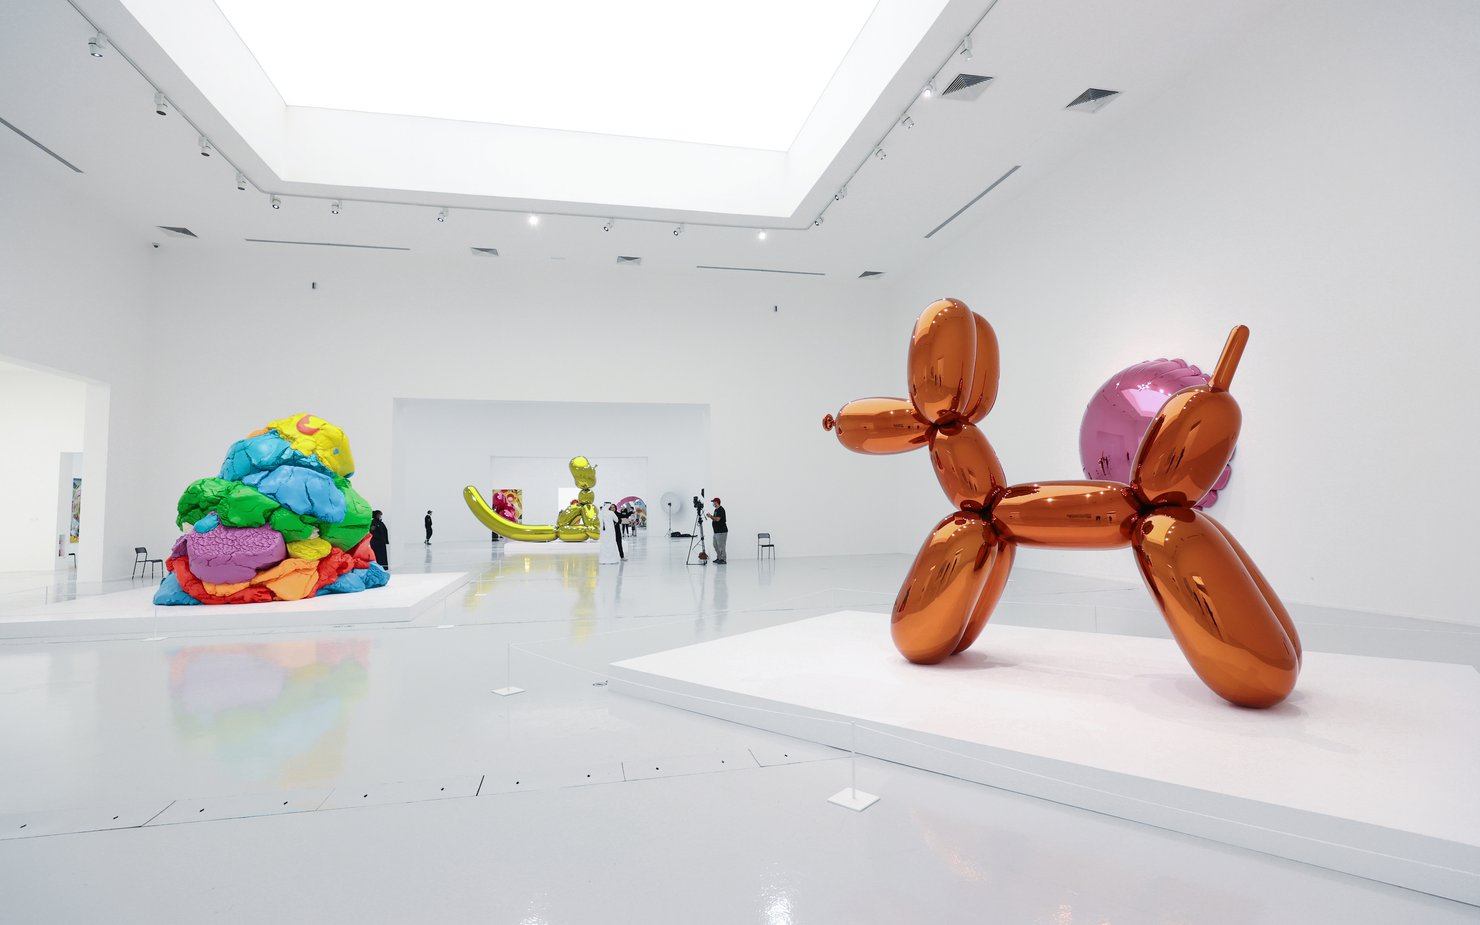 Visitors inside the galleries of the exhibition Jeff Koons: Lost In America